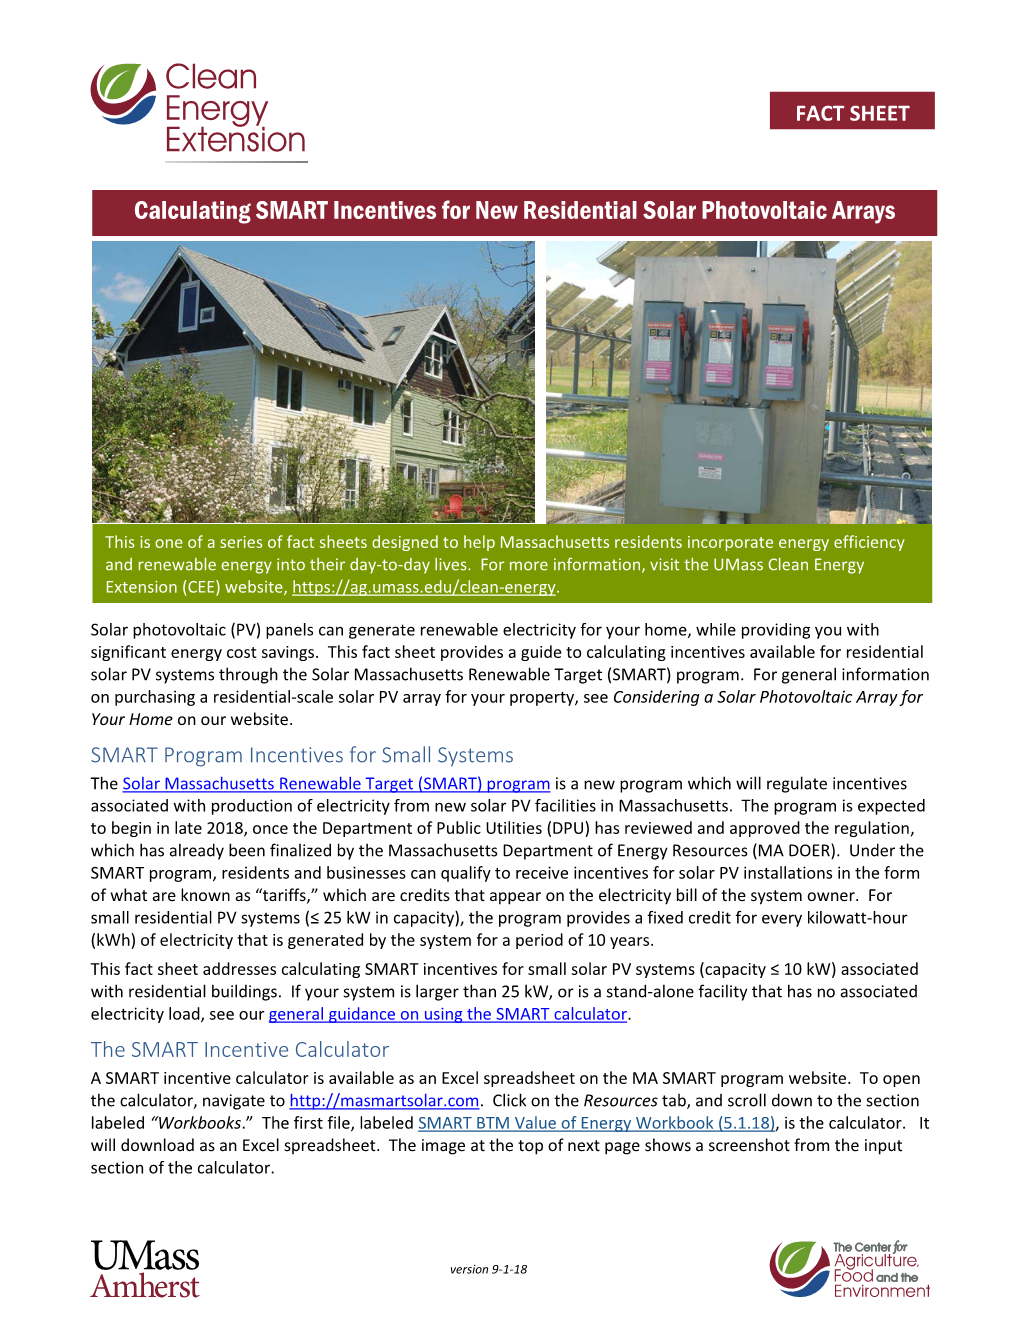 Calculating SMART Incentives for New Residential Solar Photovoltaic Arrays